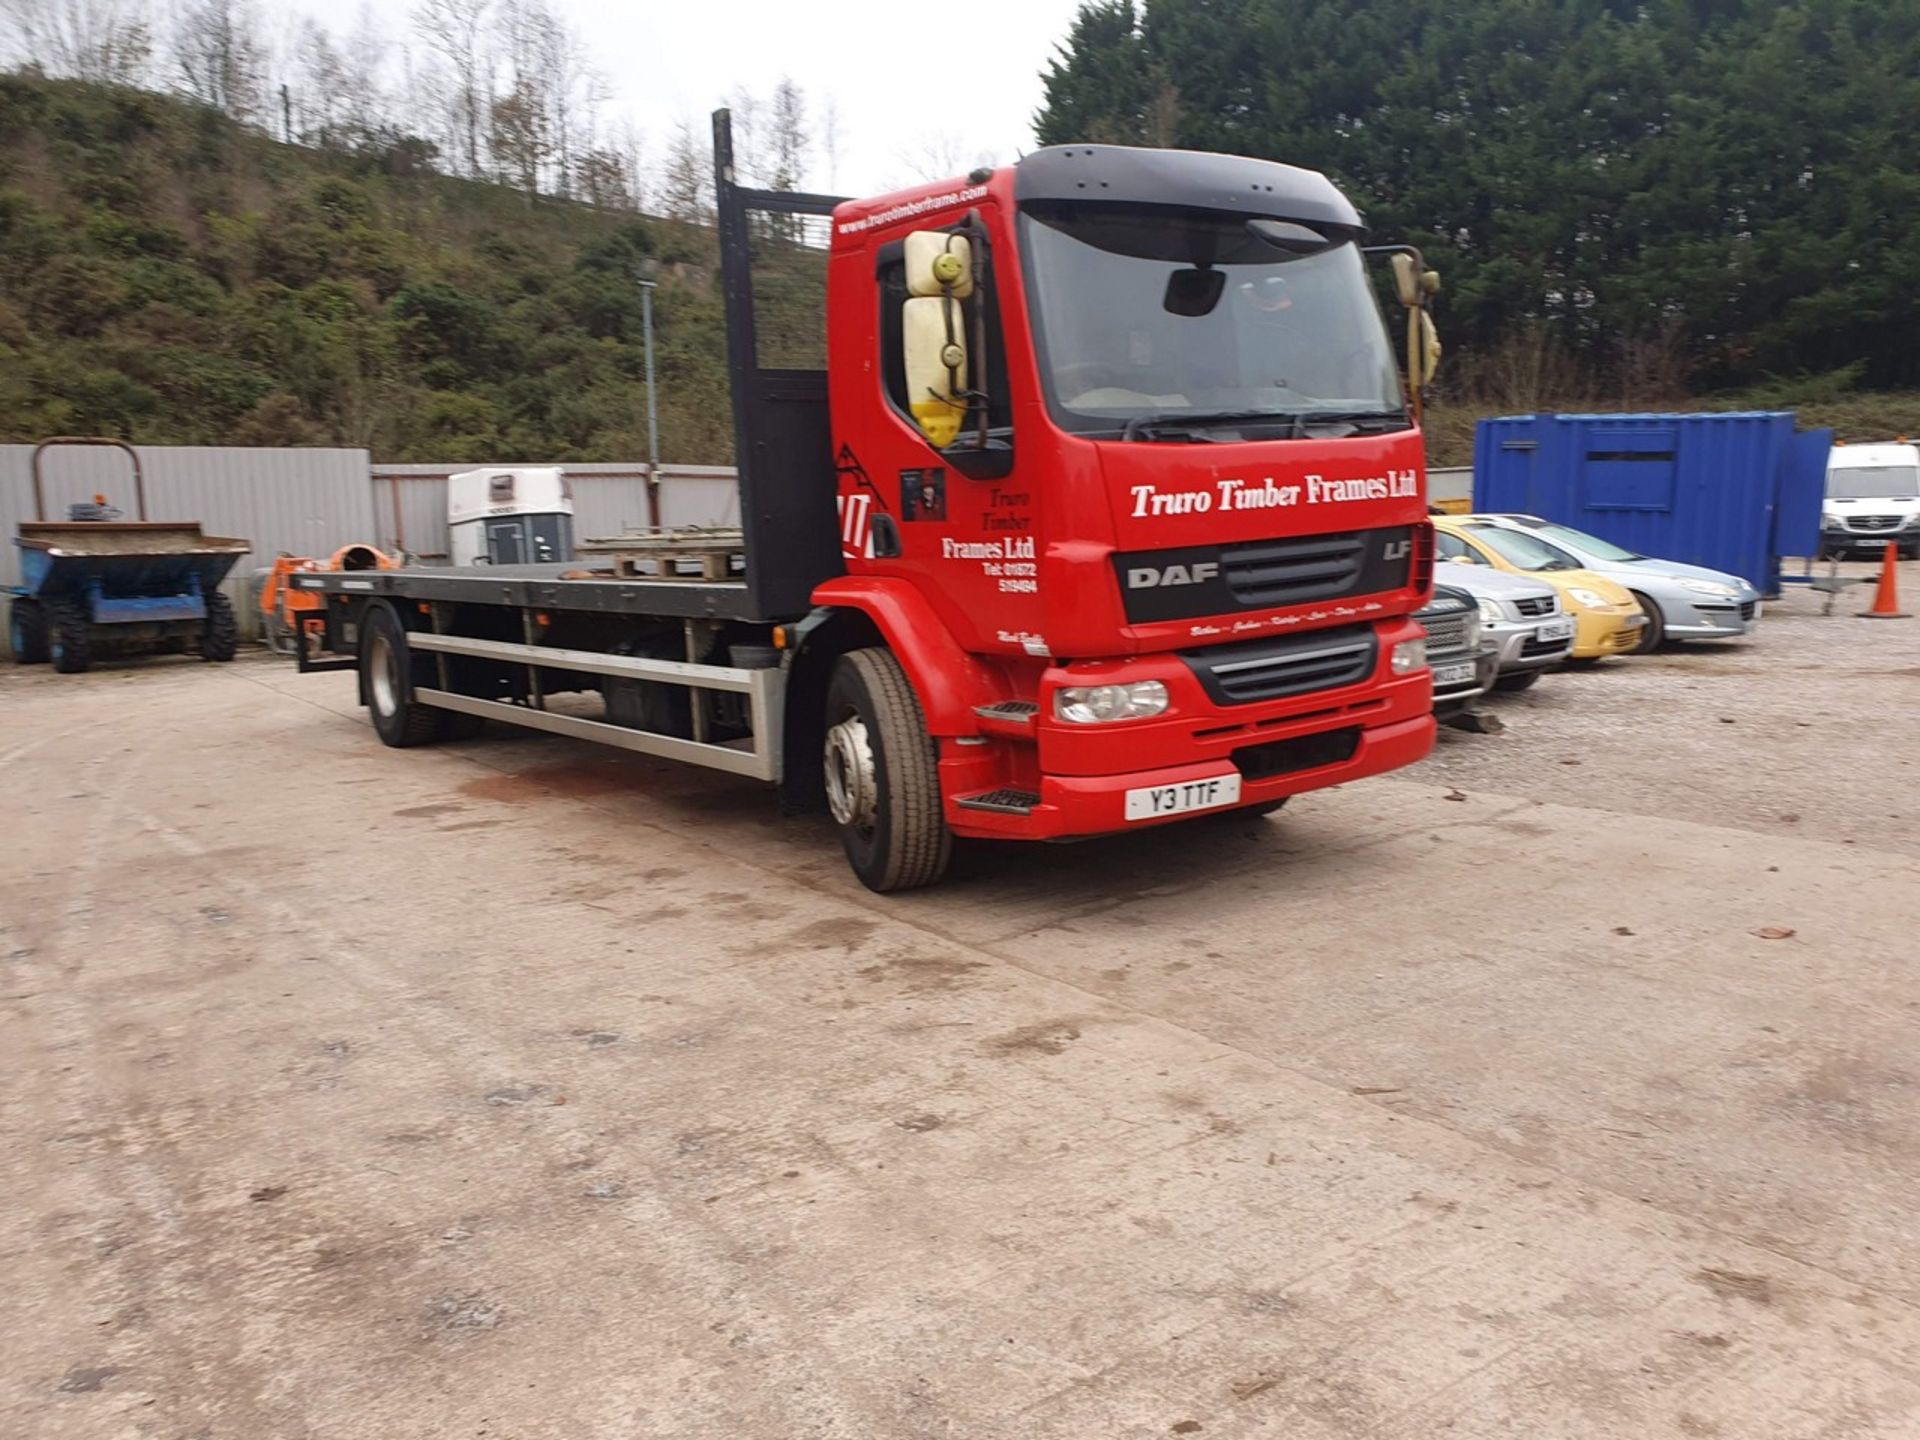 13/13 DAF TRUCKS FLAT BED - 6693cc 2dr (Red) - Image 4 of 23